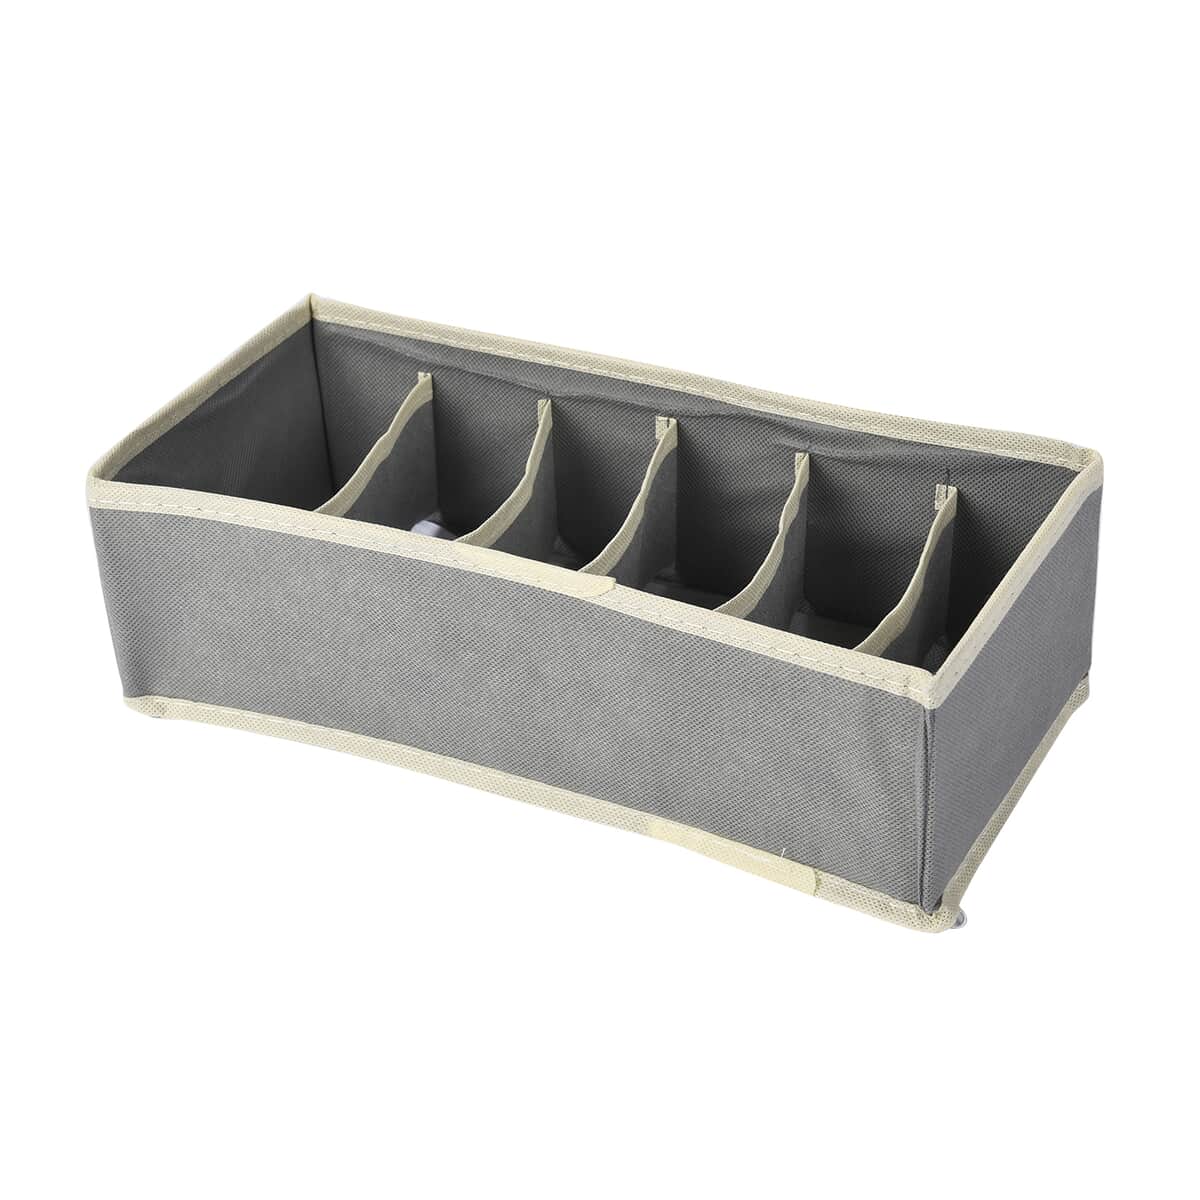 Set of 4 Gray Non-Woven Storage Organizers image number 6